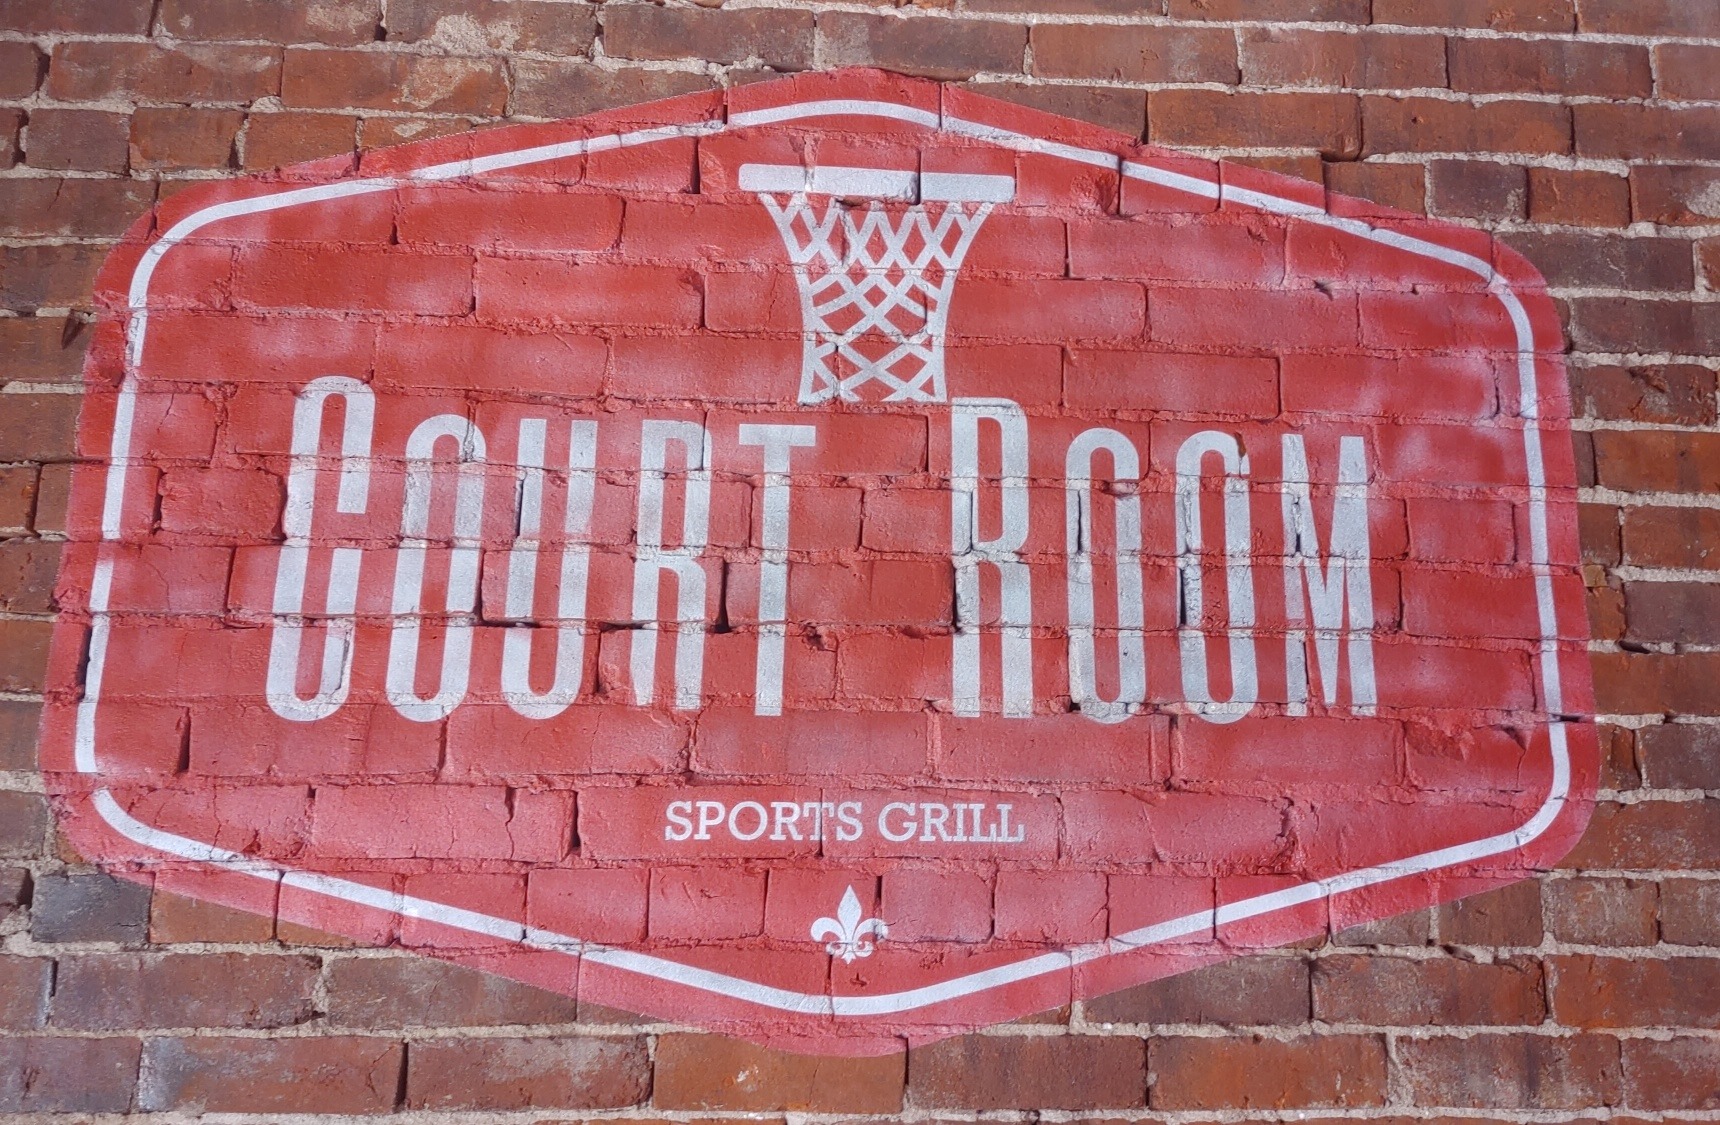 Court Room Sports Grill